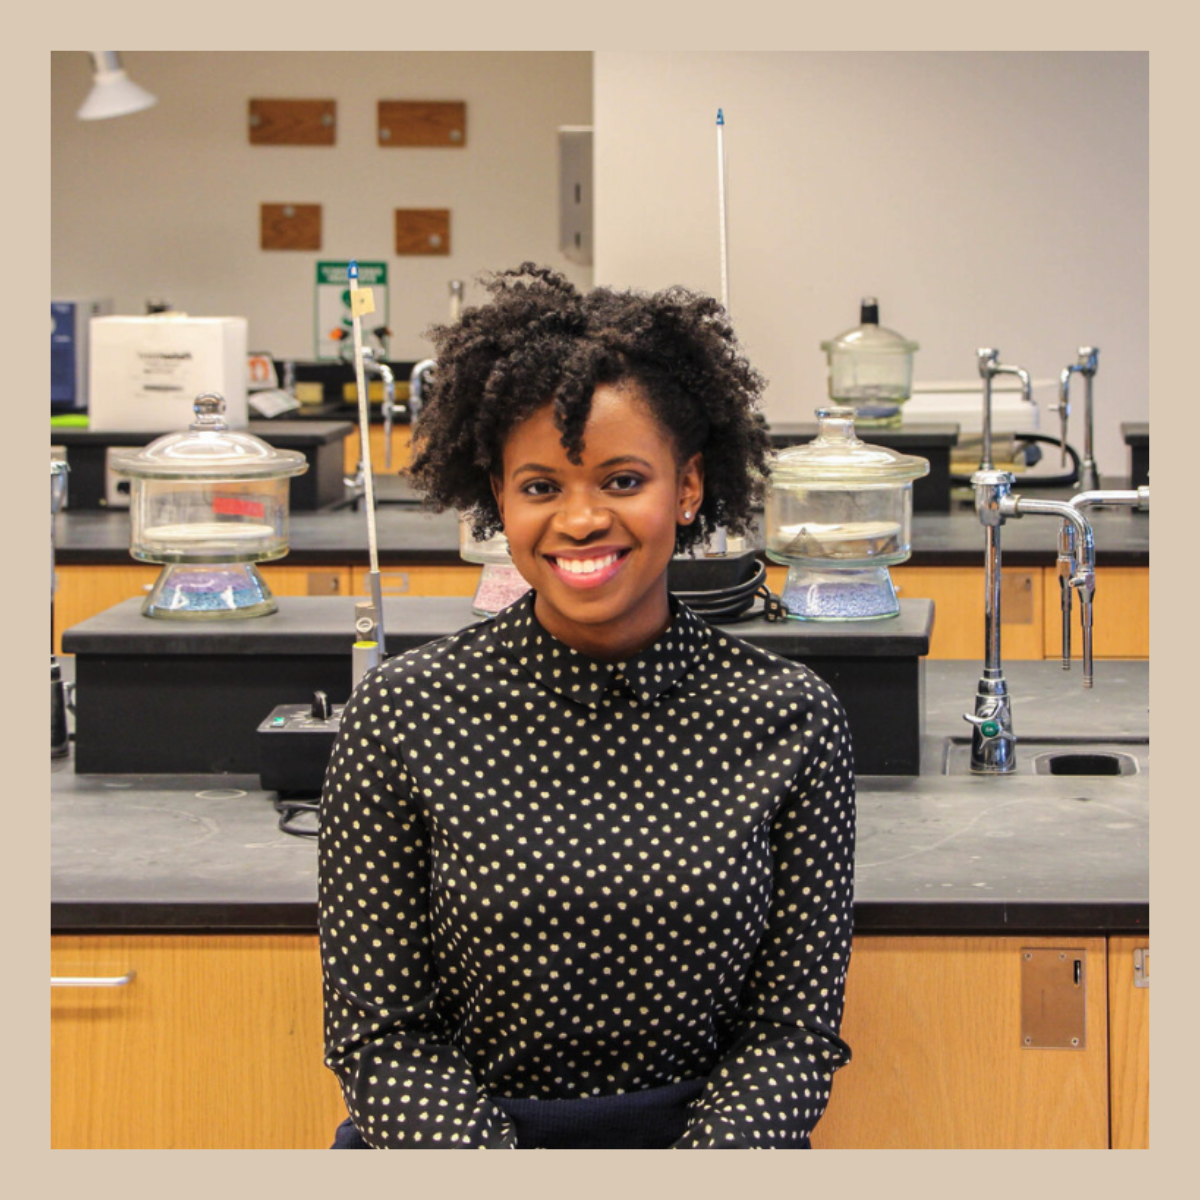 Photo of a young Black woman smiling in a laboratory